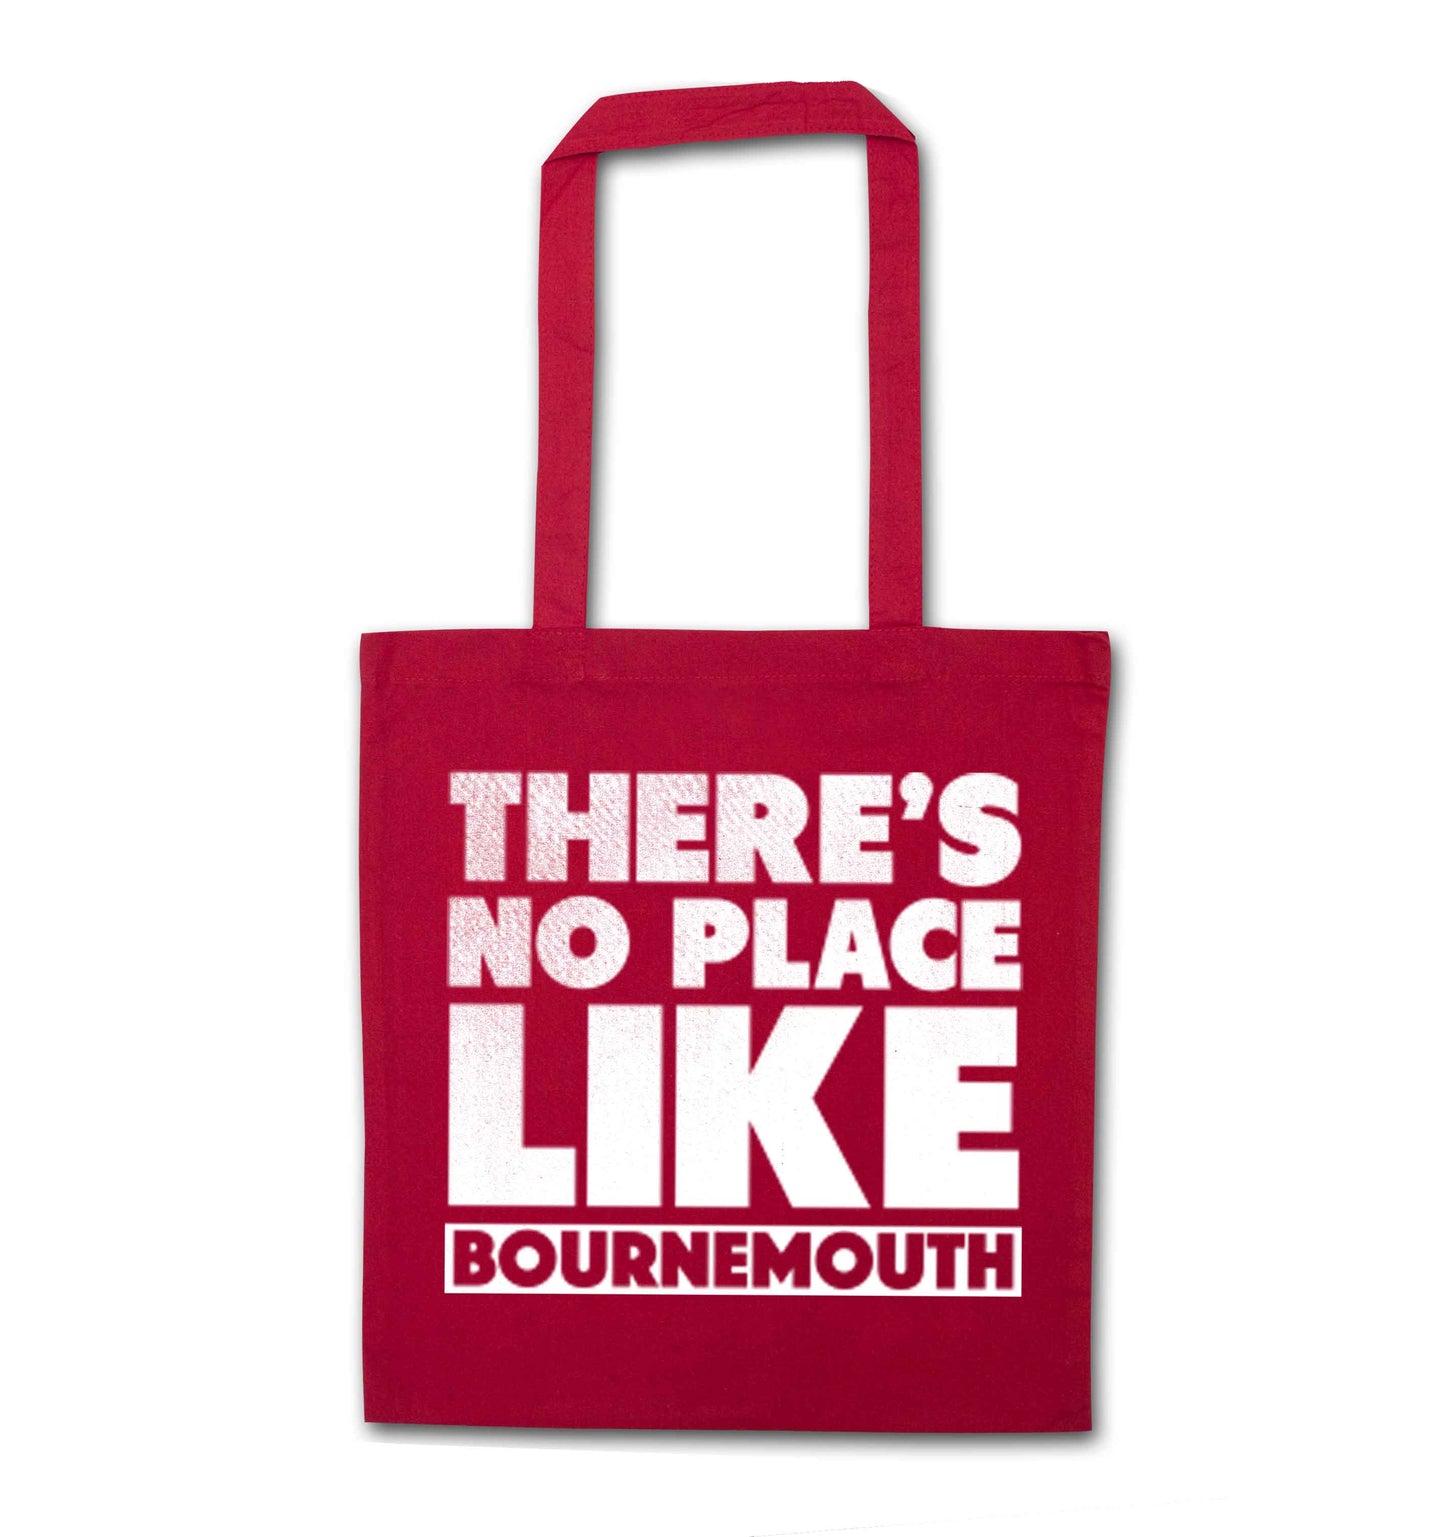 There's no place like Bournemouth red tote bag